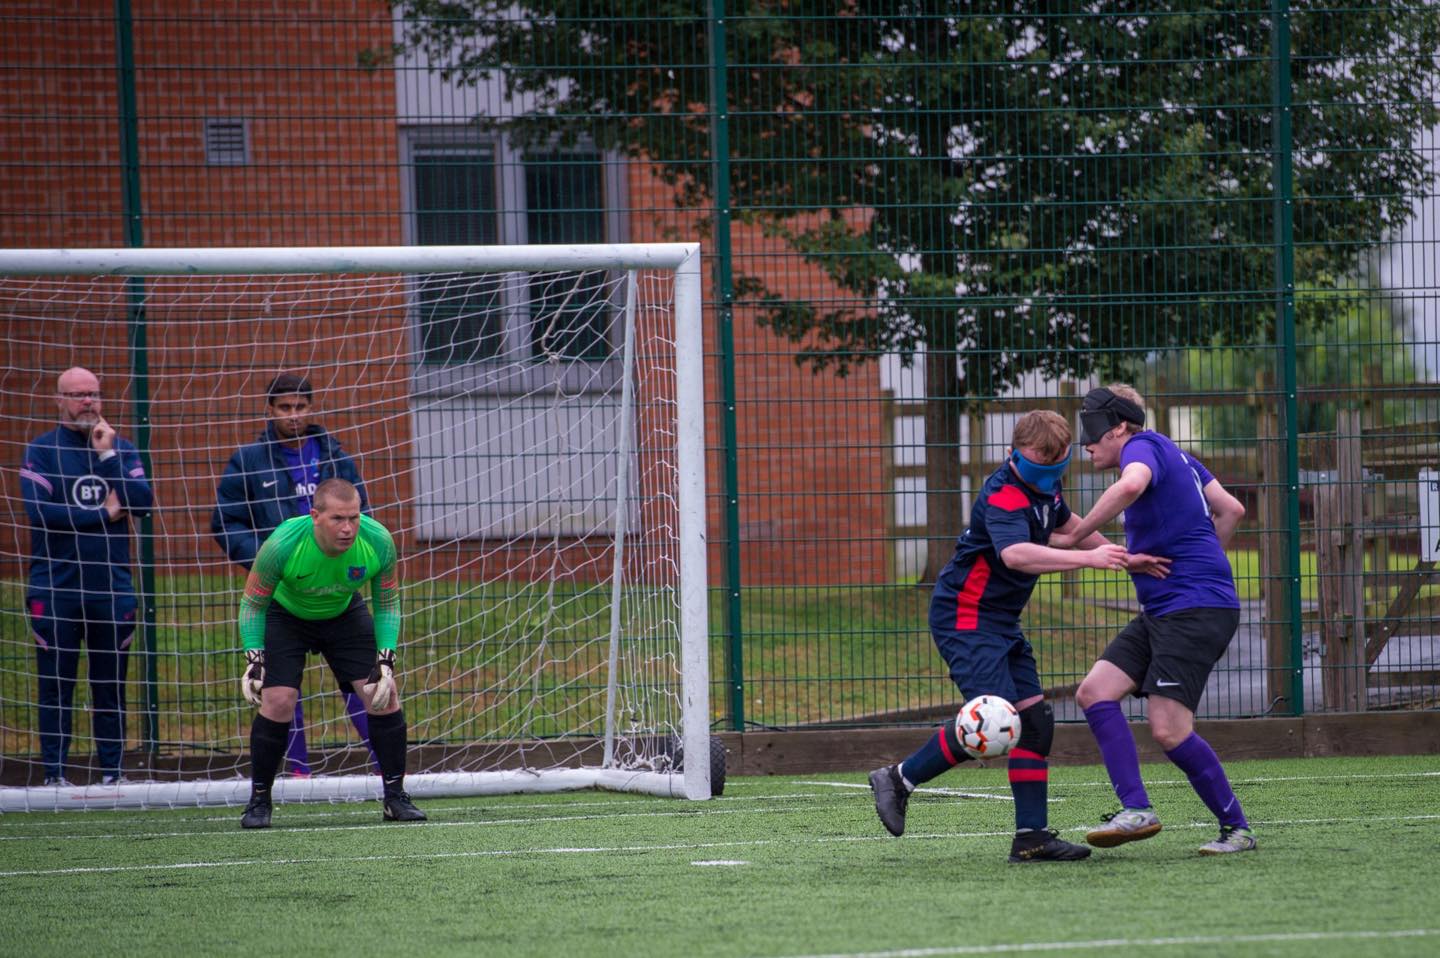 FOOTBALL | Royal National College for the Blind side travel to St George’s Park for the Blind Football Final today